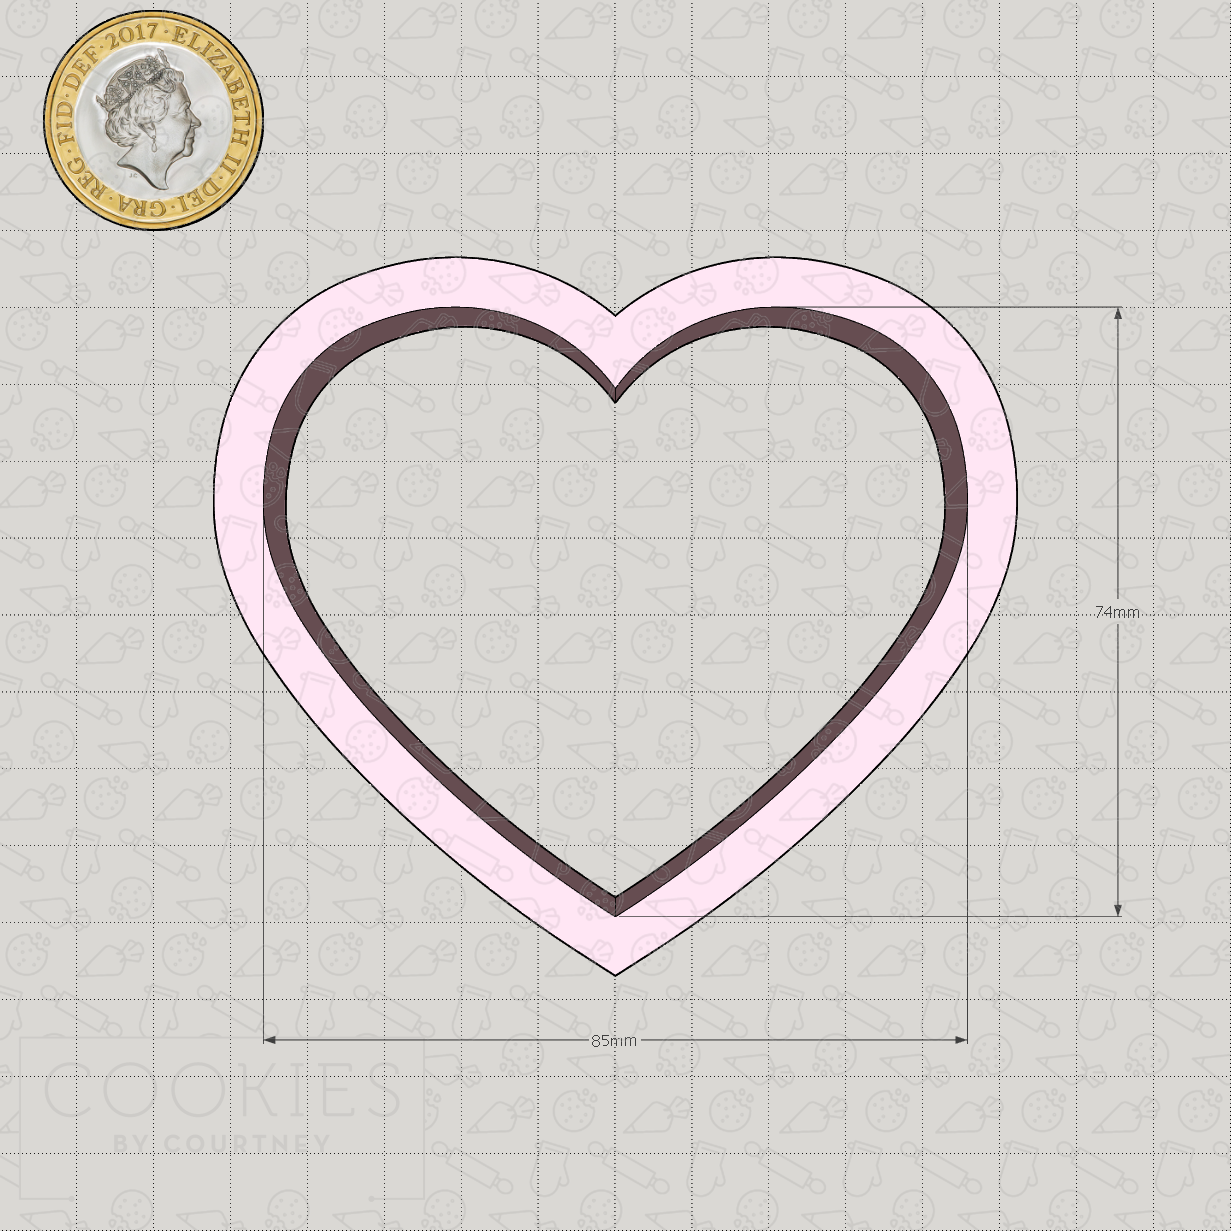 Rounded Heart Cookie Cutter